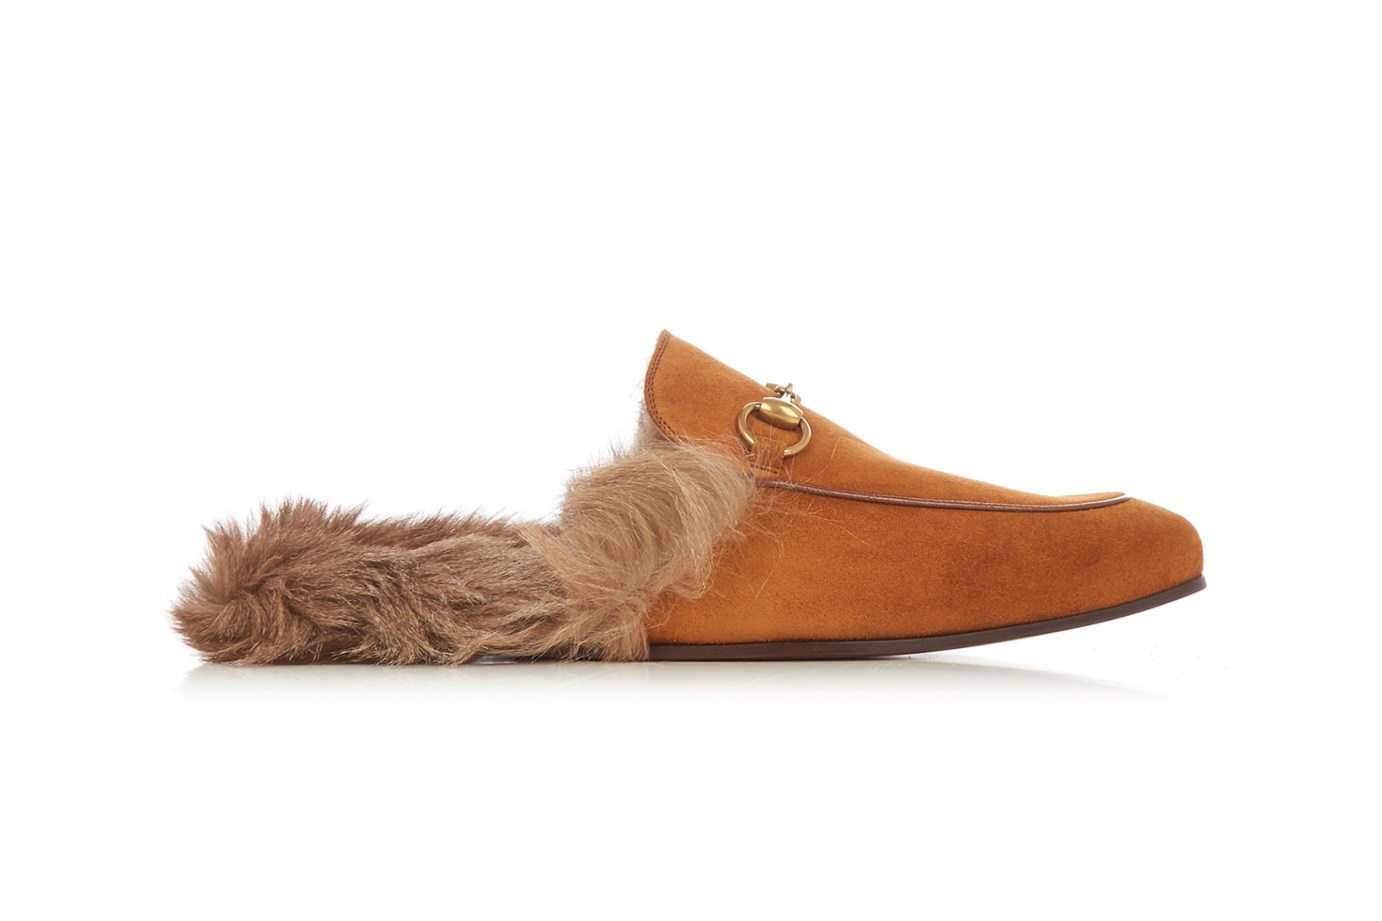 The Gucci Loafers Features Kangaroo Fur